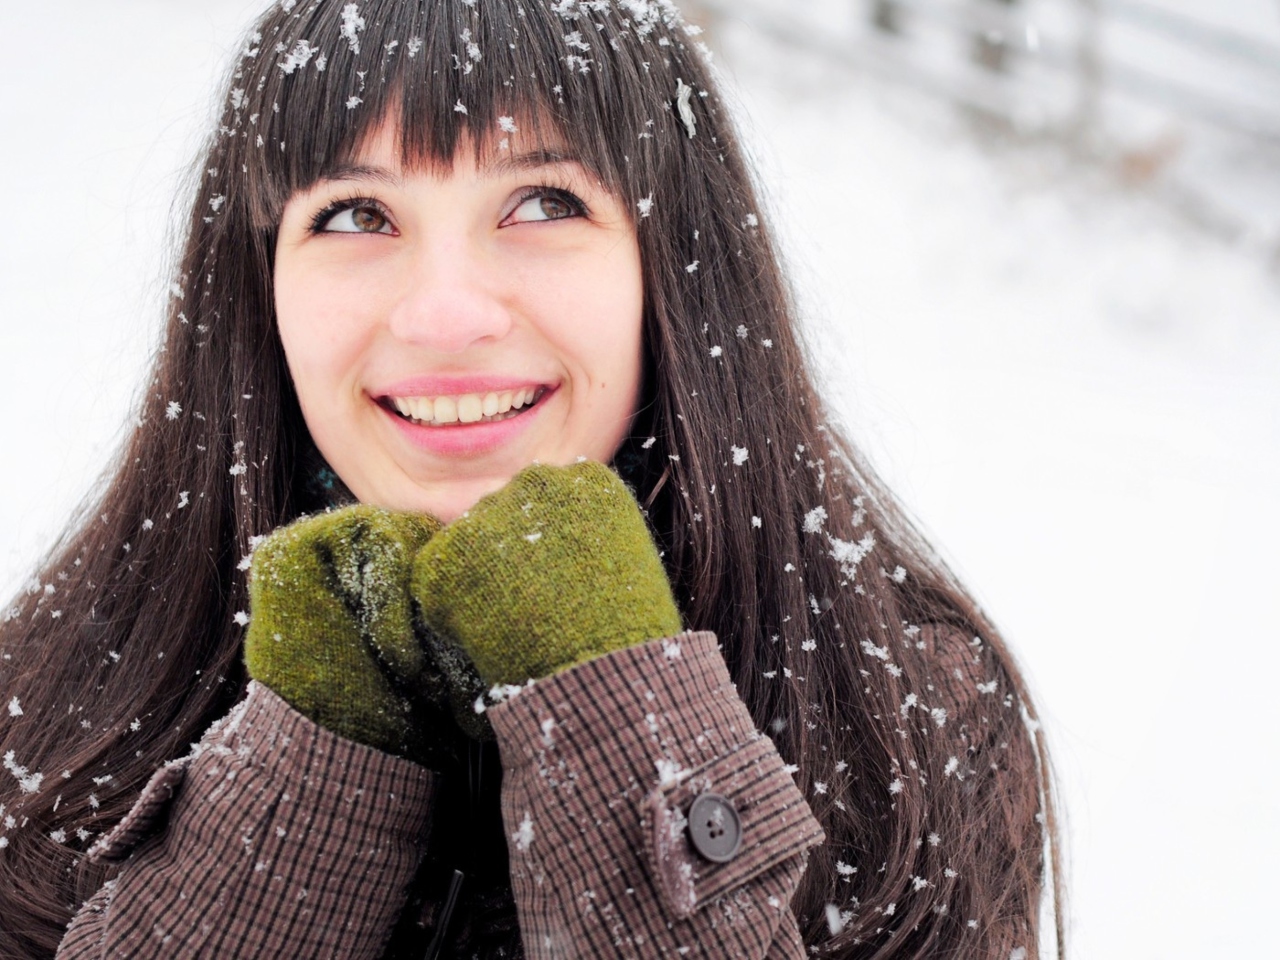 Brunette With Green Gloves In Snow screenshot #1 1280x960